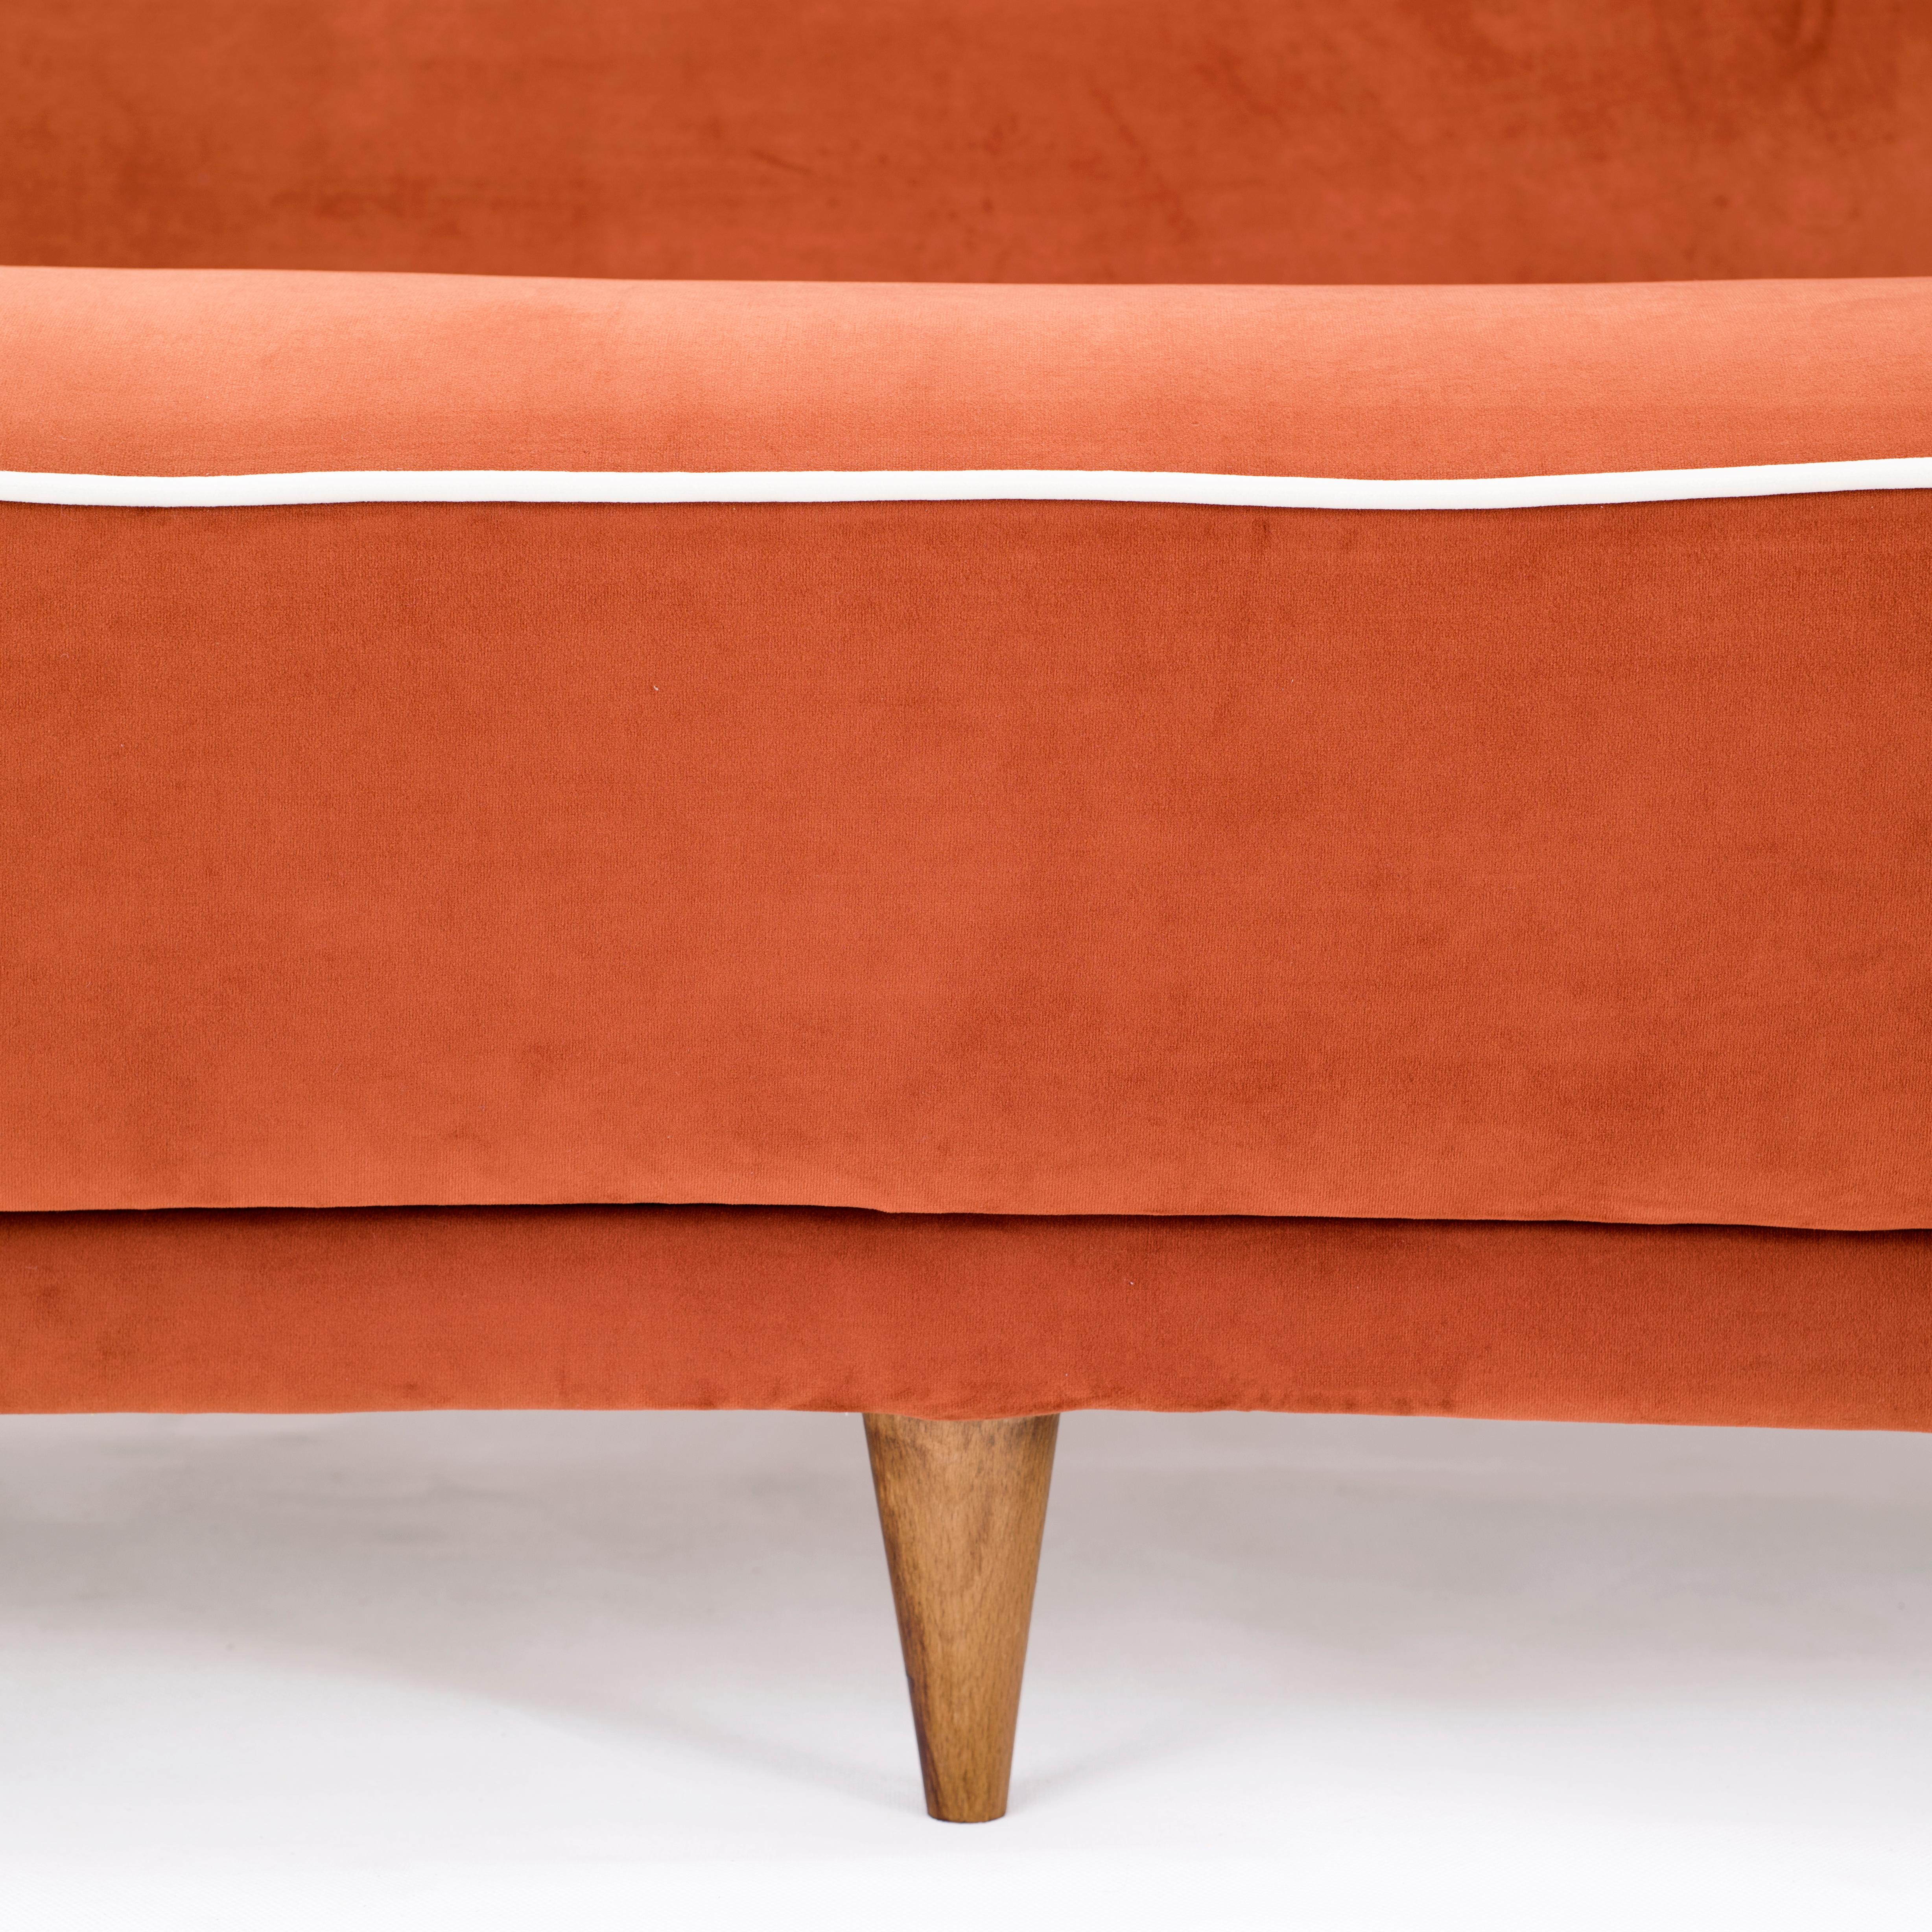 Ico Parisi Curved Sofa from Italy, 1950s
Fabric, wood
Upholstered in velvet.